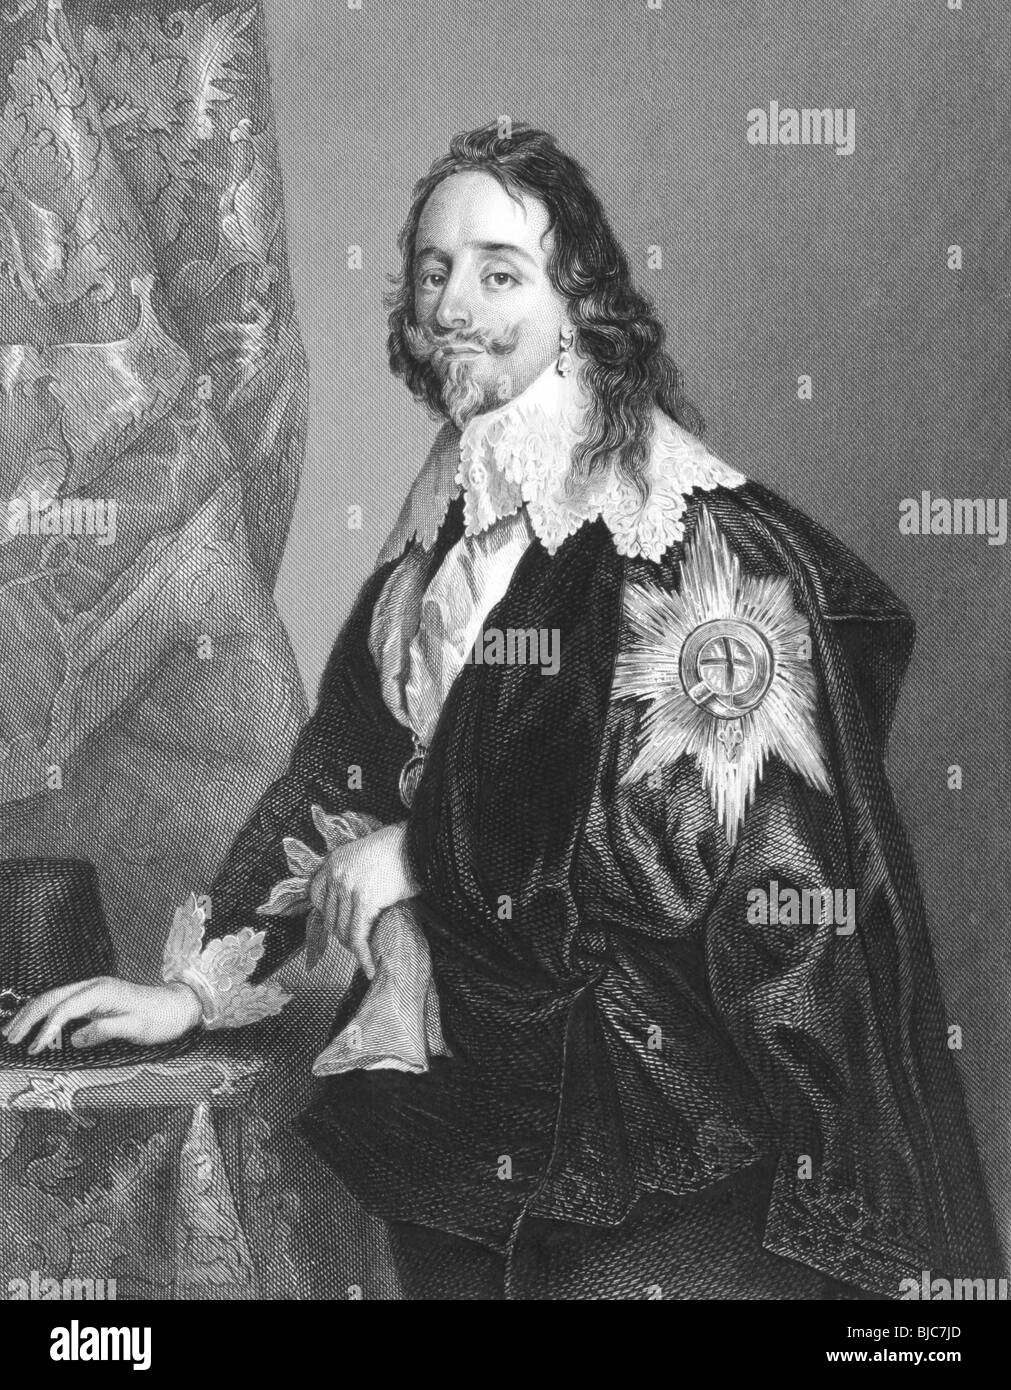 Charles I (1600-1649) on engraving from the 1800s. King of England, Scotland and Ireland from 1625 until his execution. Stock Photo